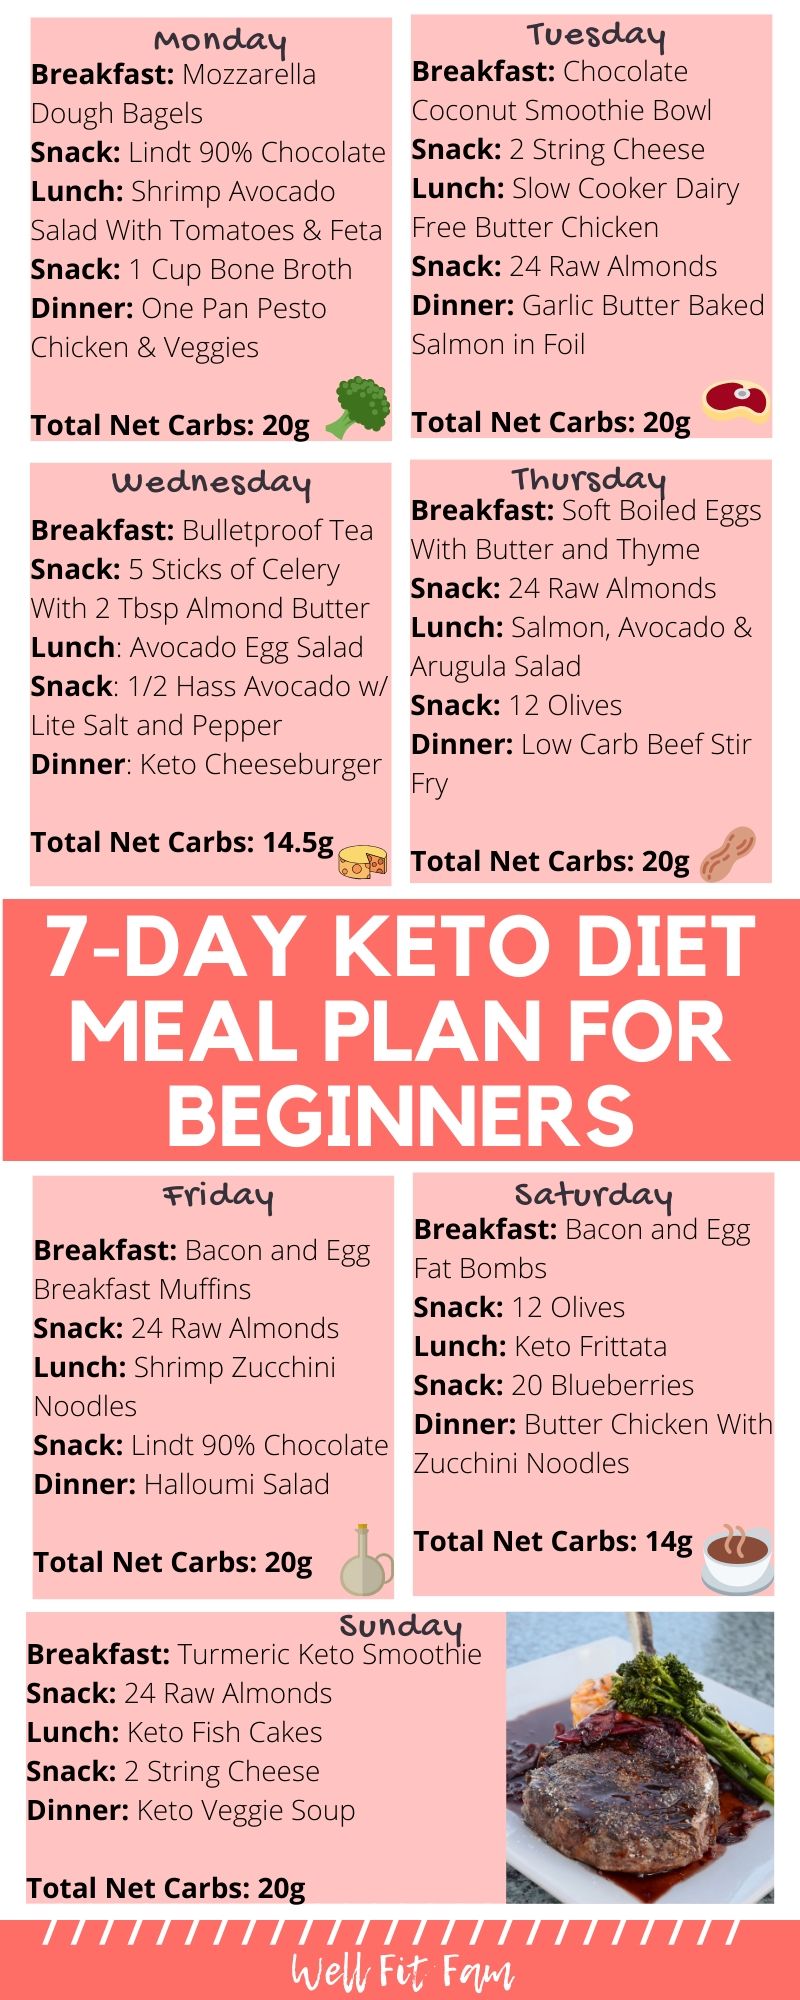 How To Meal Plan For Keto Diet